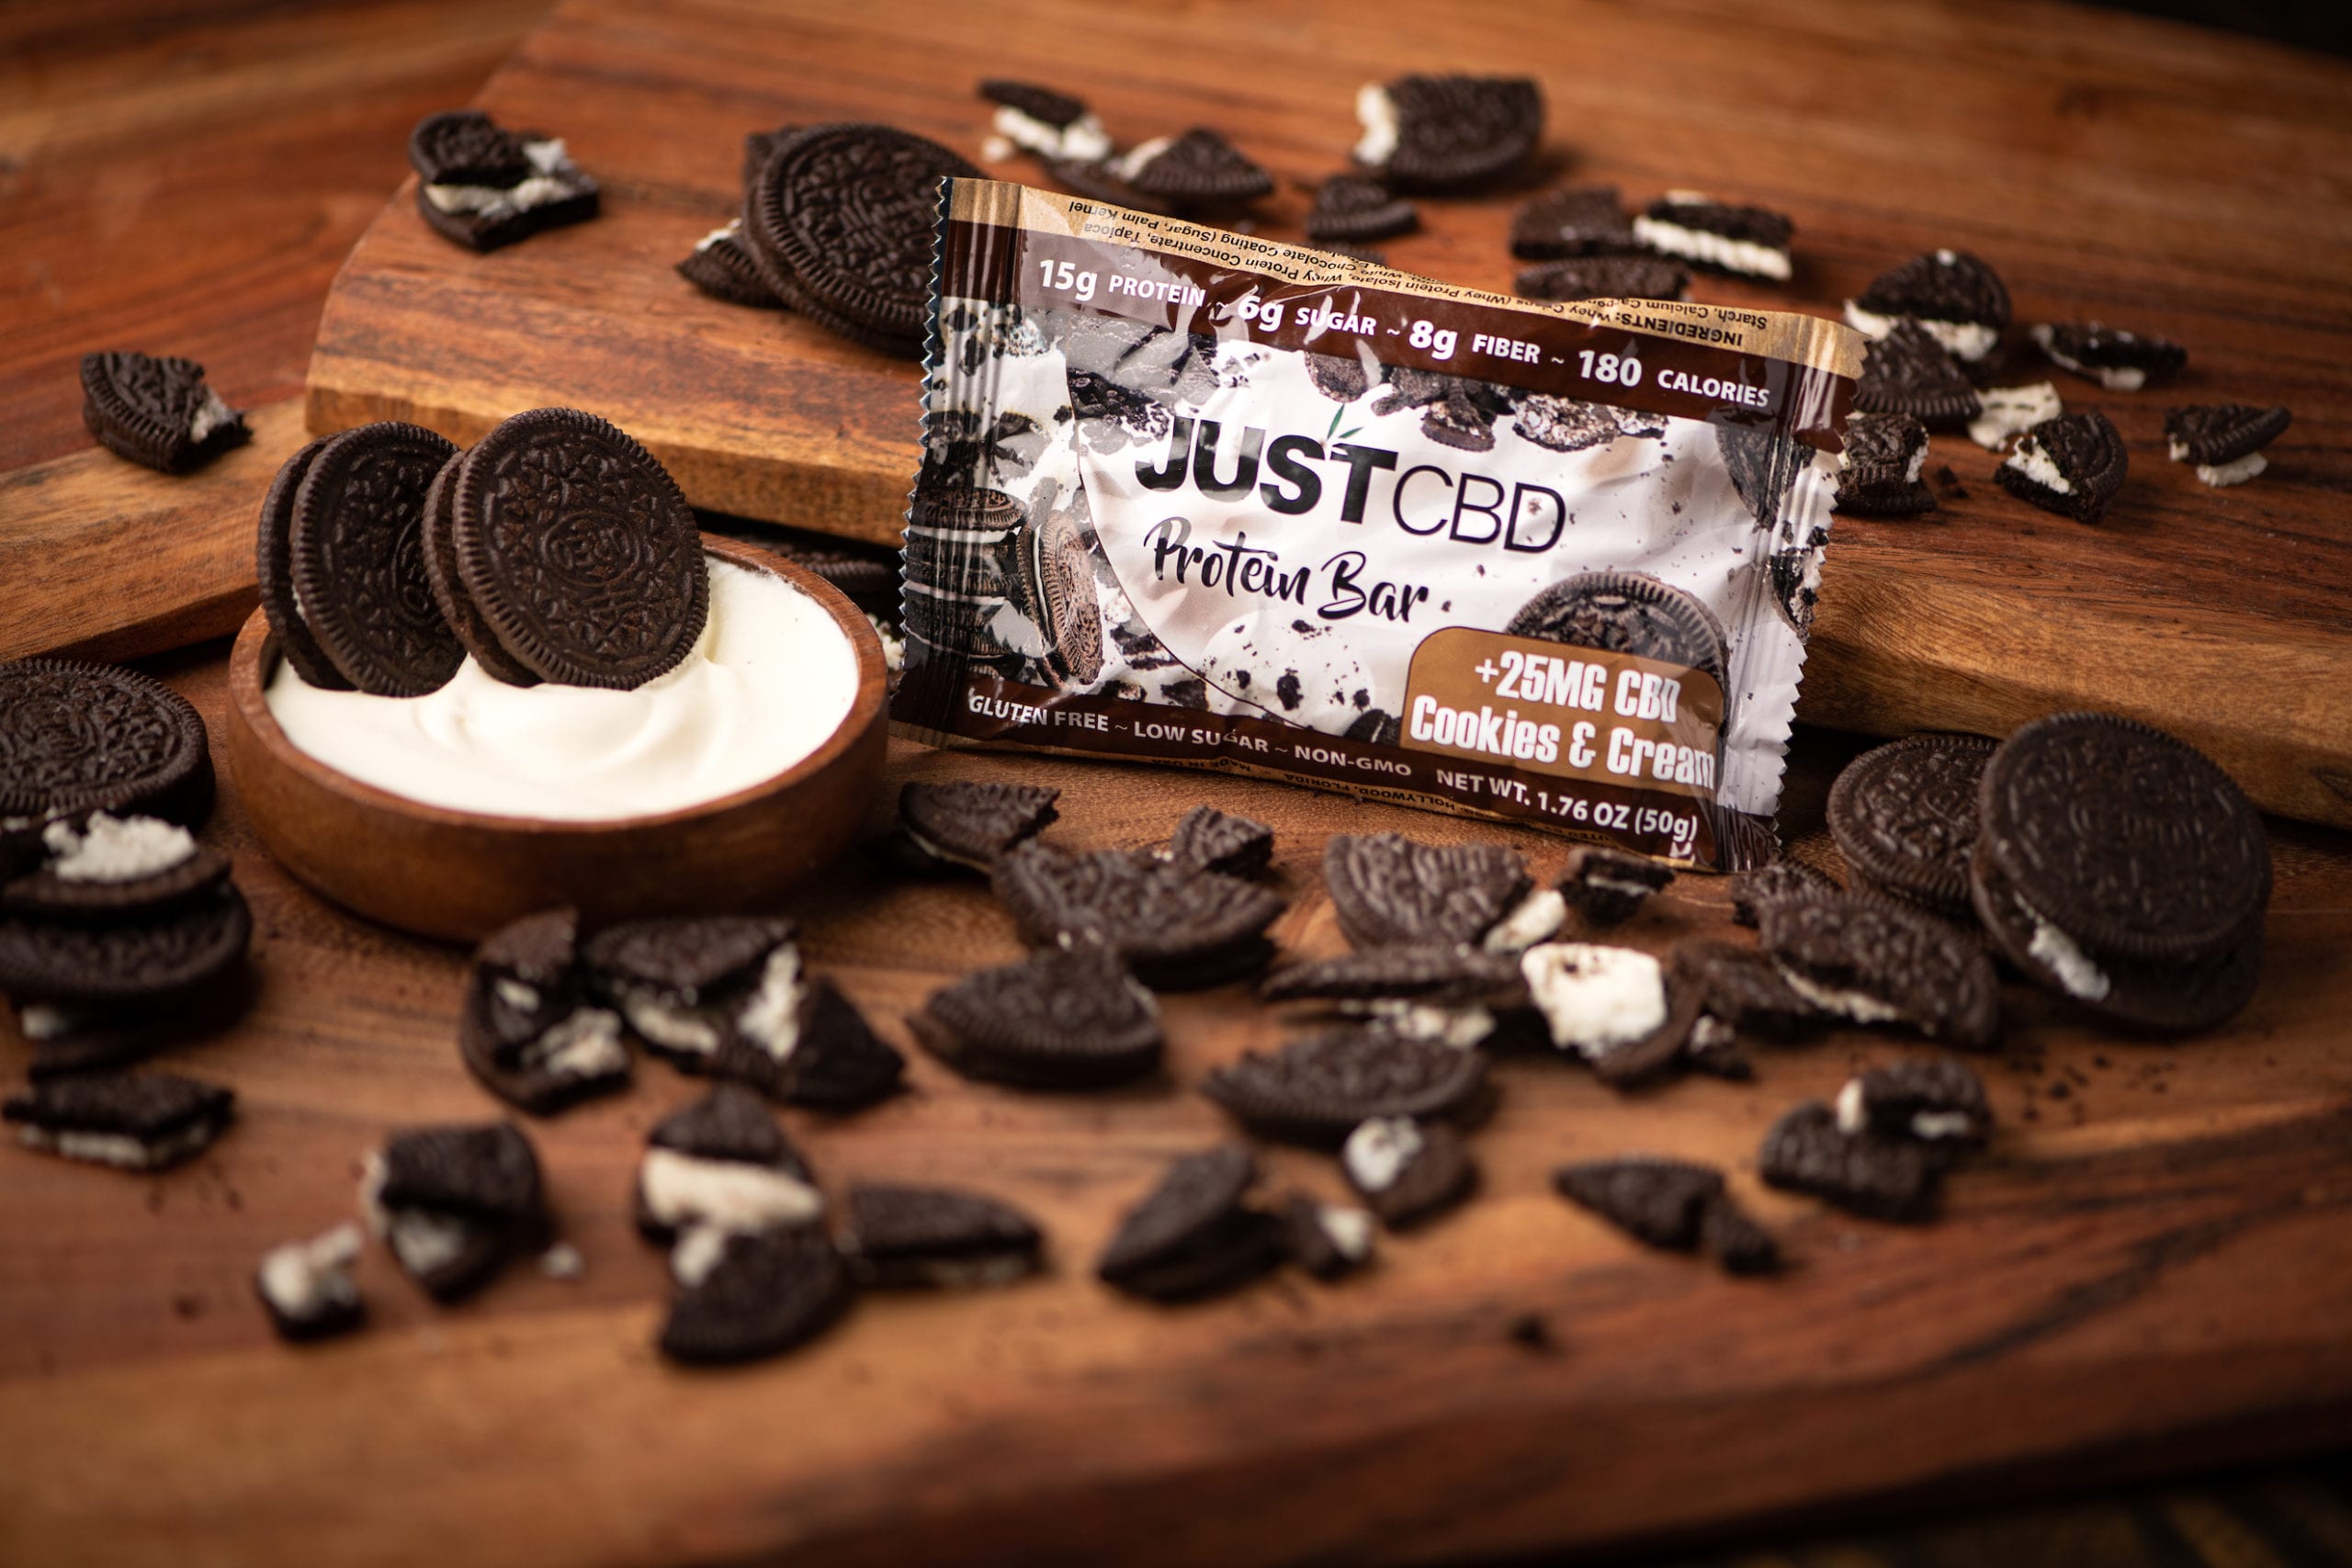 JustCBD Product Photography and Just CBD Products JUSTCBD Cookies and cream protein bar package surrounded by cookies and bowl of cream on a wooden table